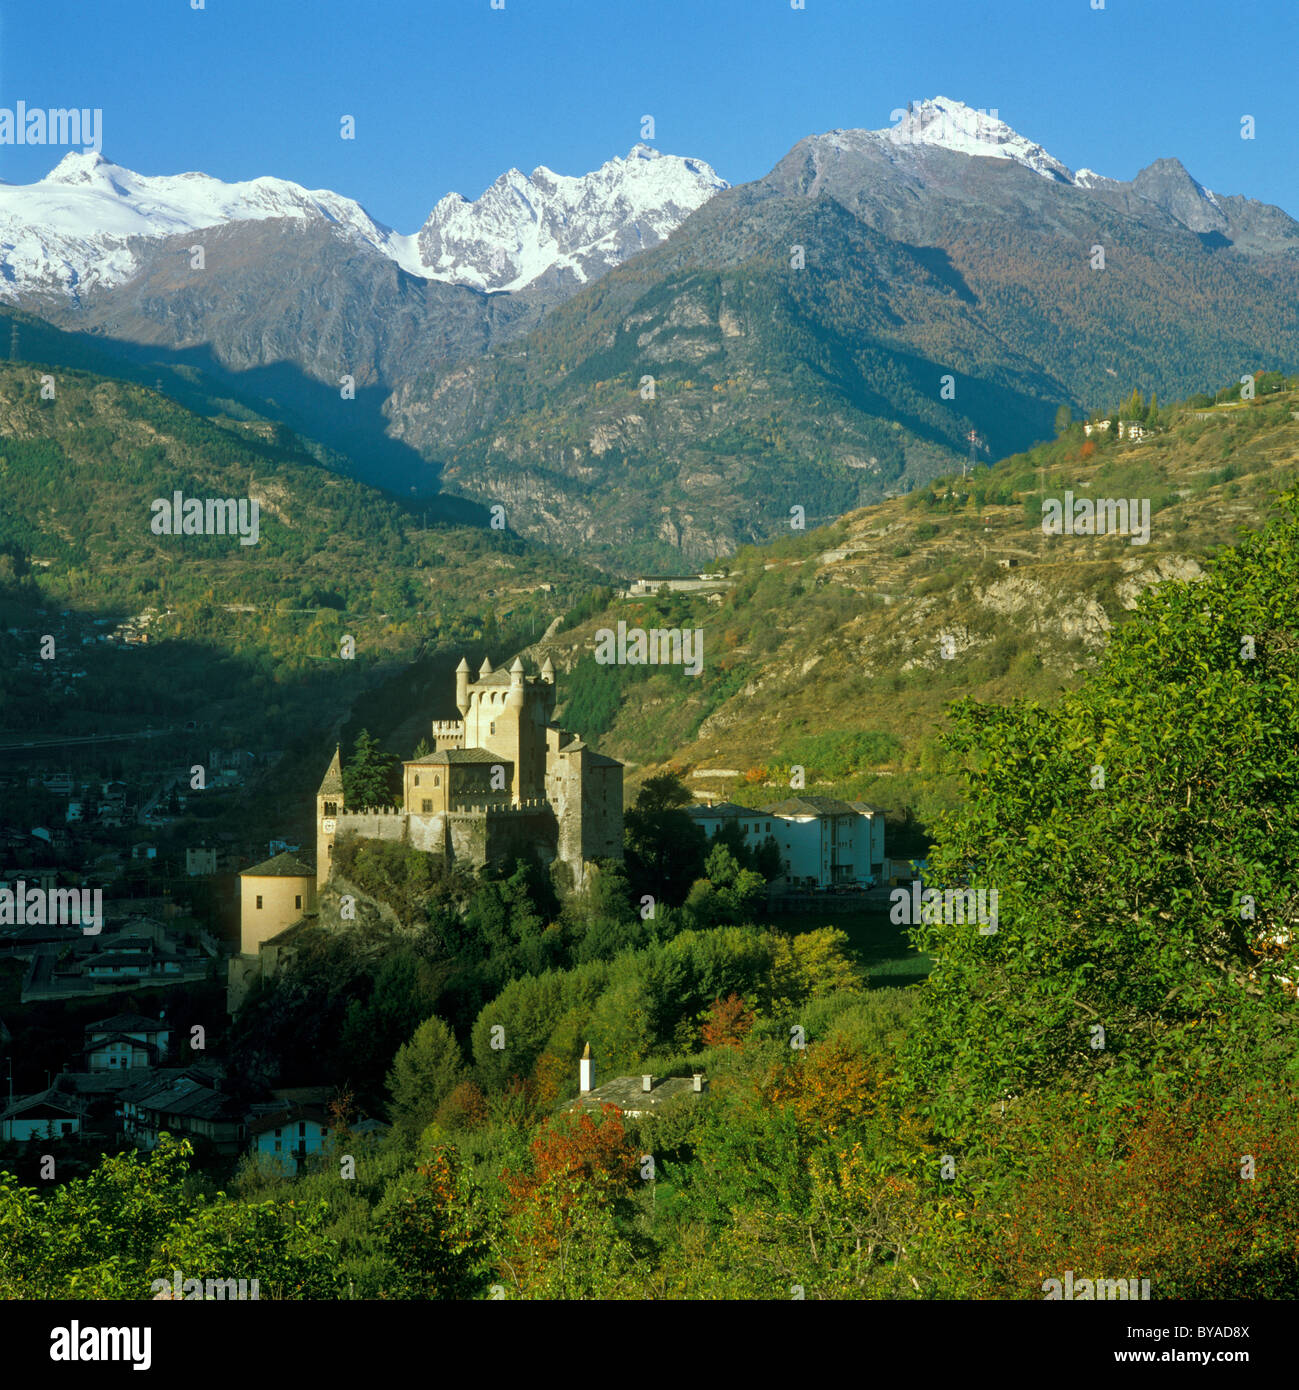 Saint Pierre Castle in front of the Montblanc range, Aosta Valley, Italy, Europe Stock Photo